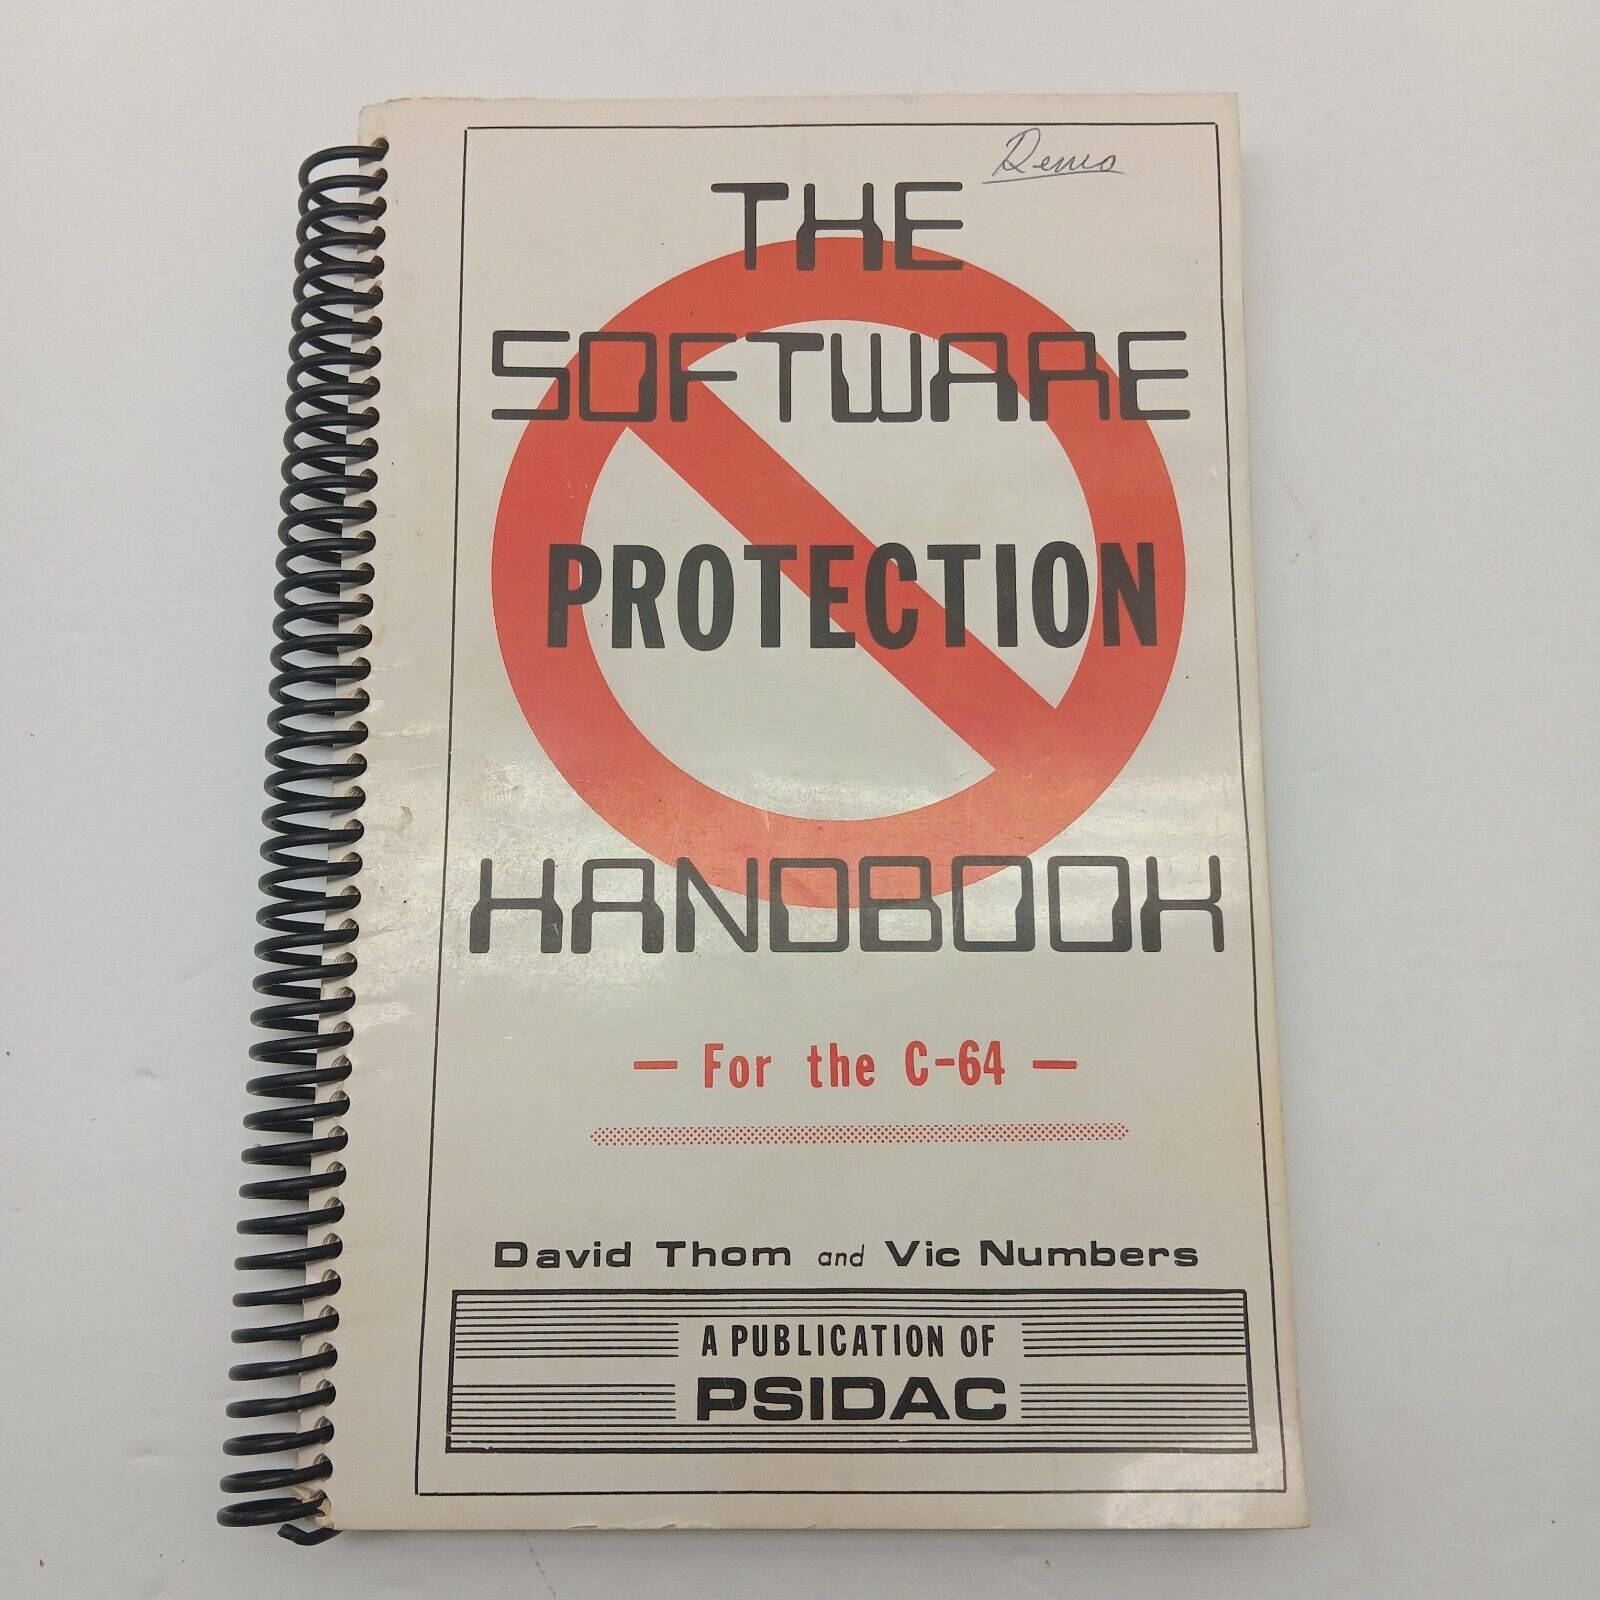 Vintage Software Protection Handbook For Commodore 64 Reference Book